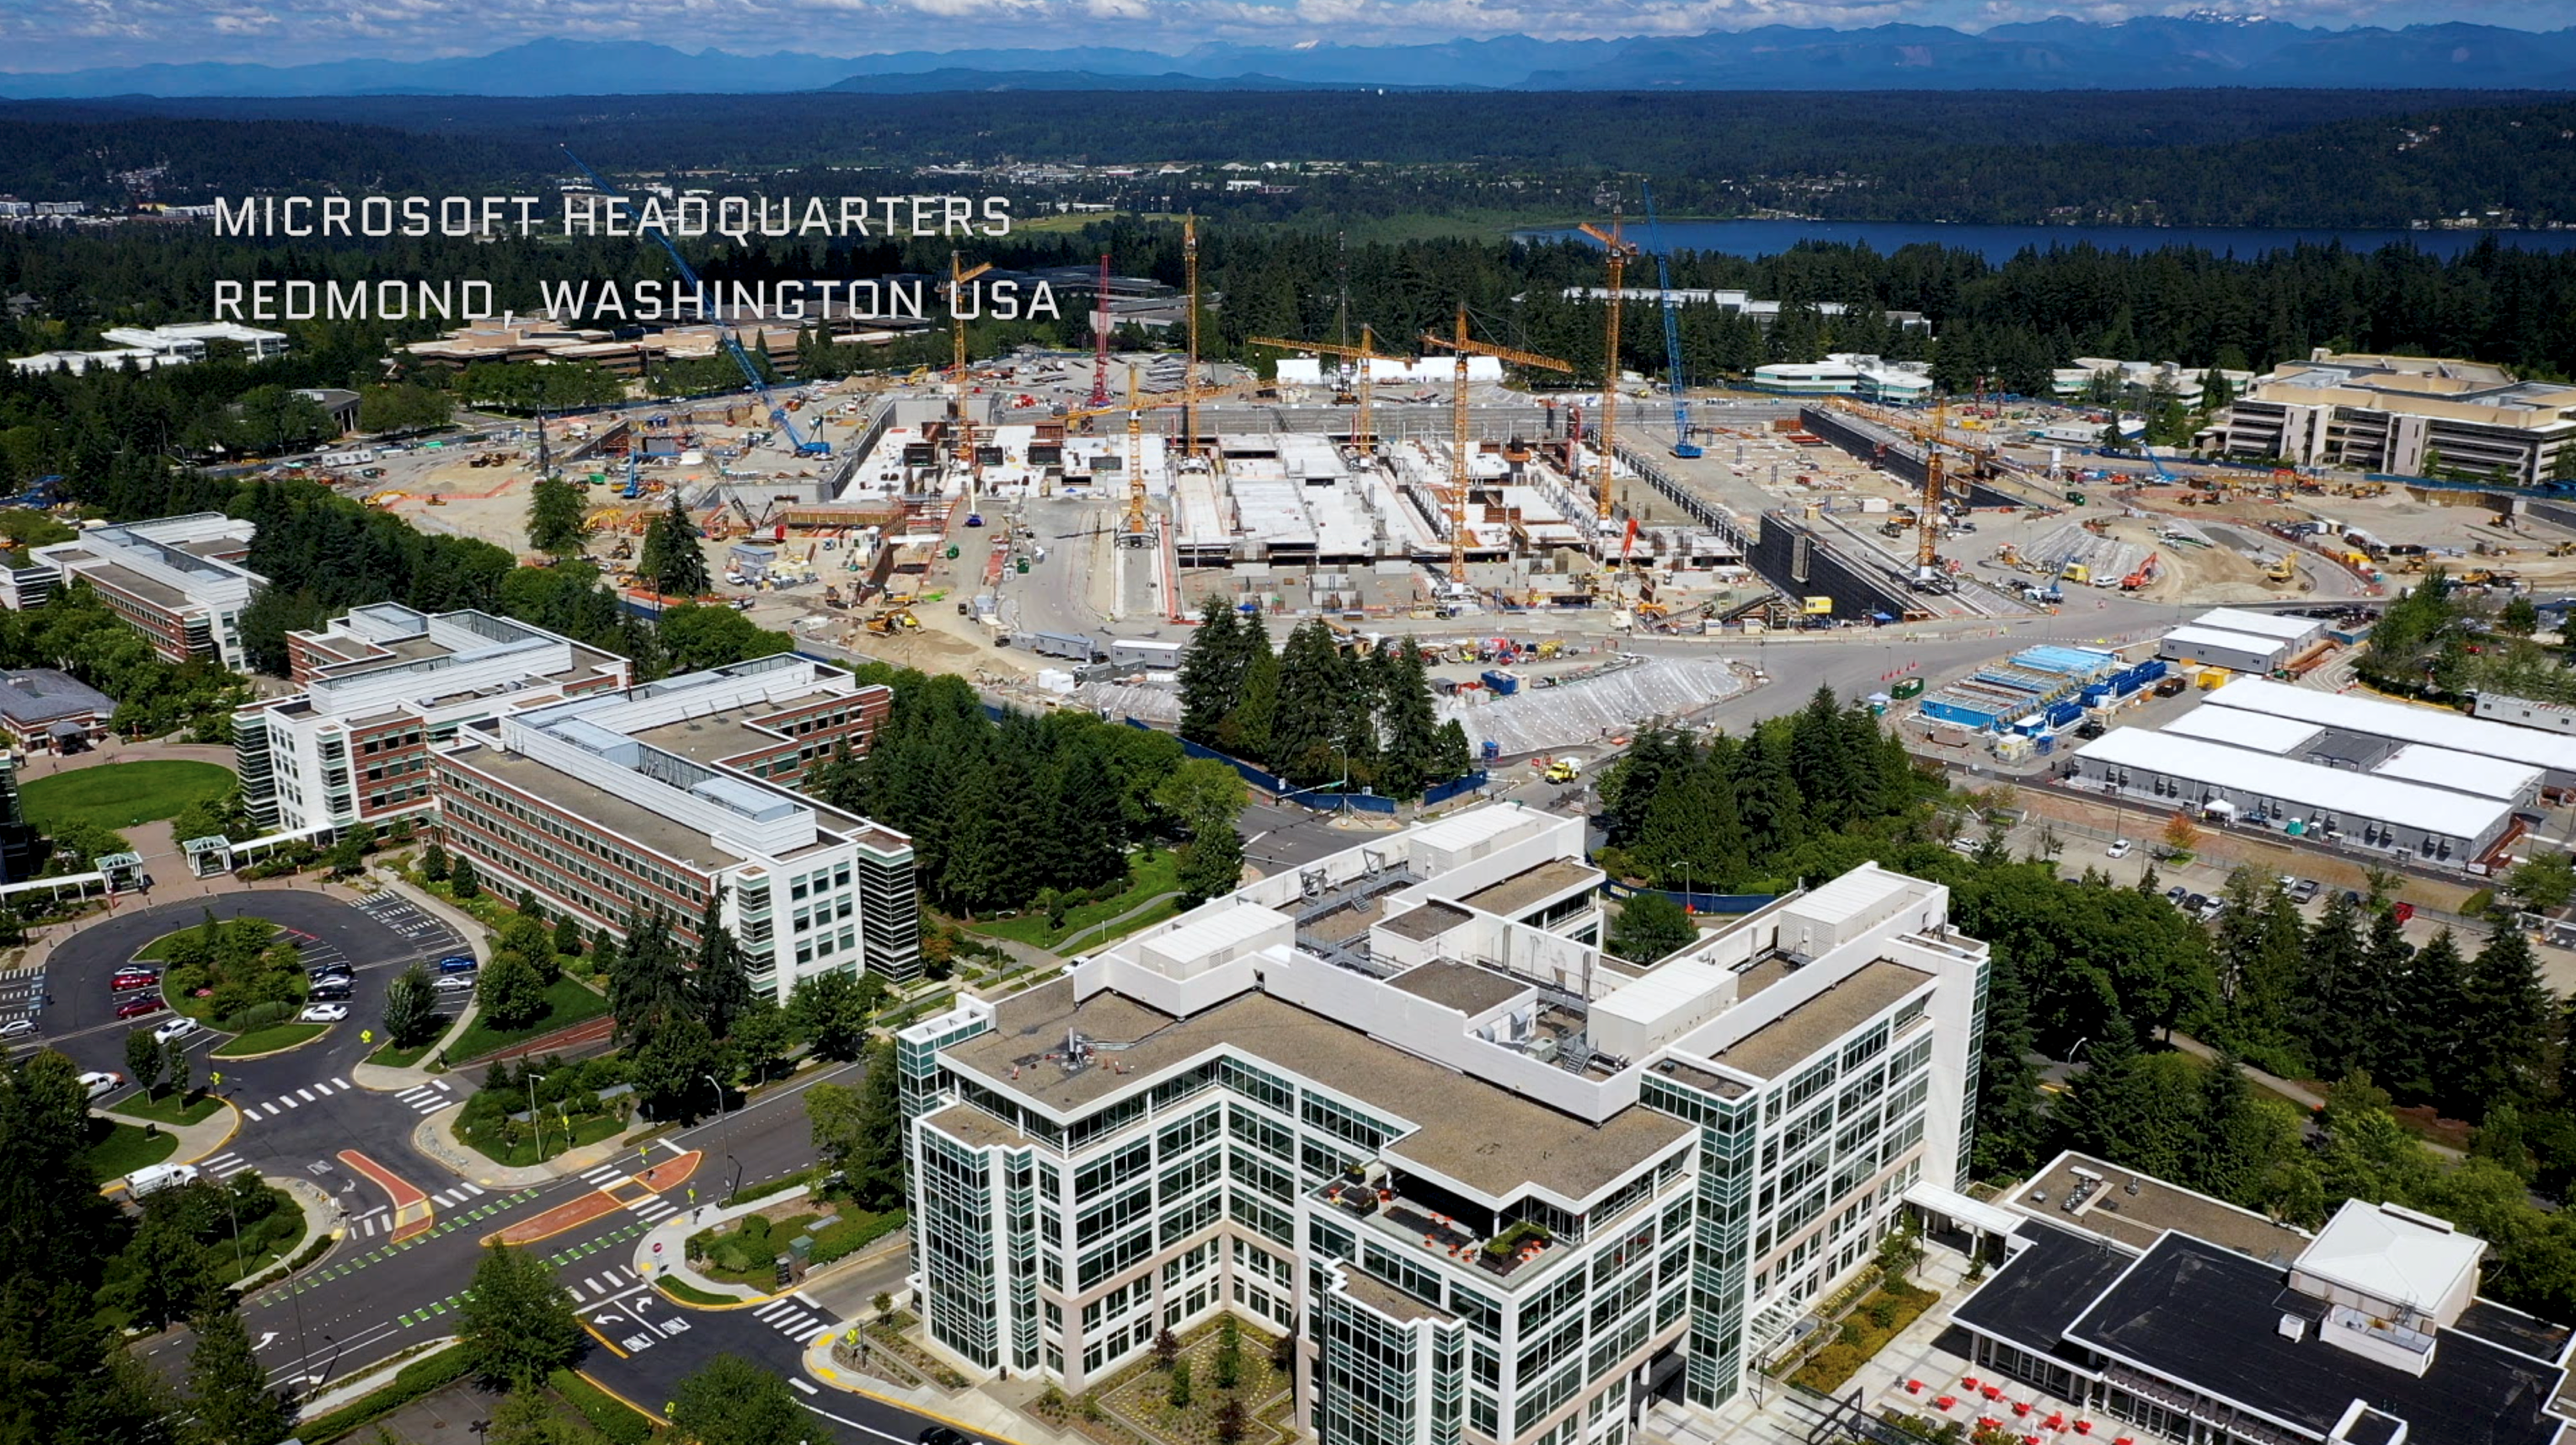 Aerial view of a building where Microsoft's headquarters are located in Redmond, Washington.